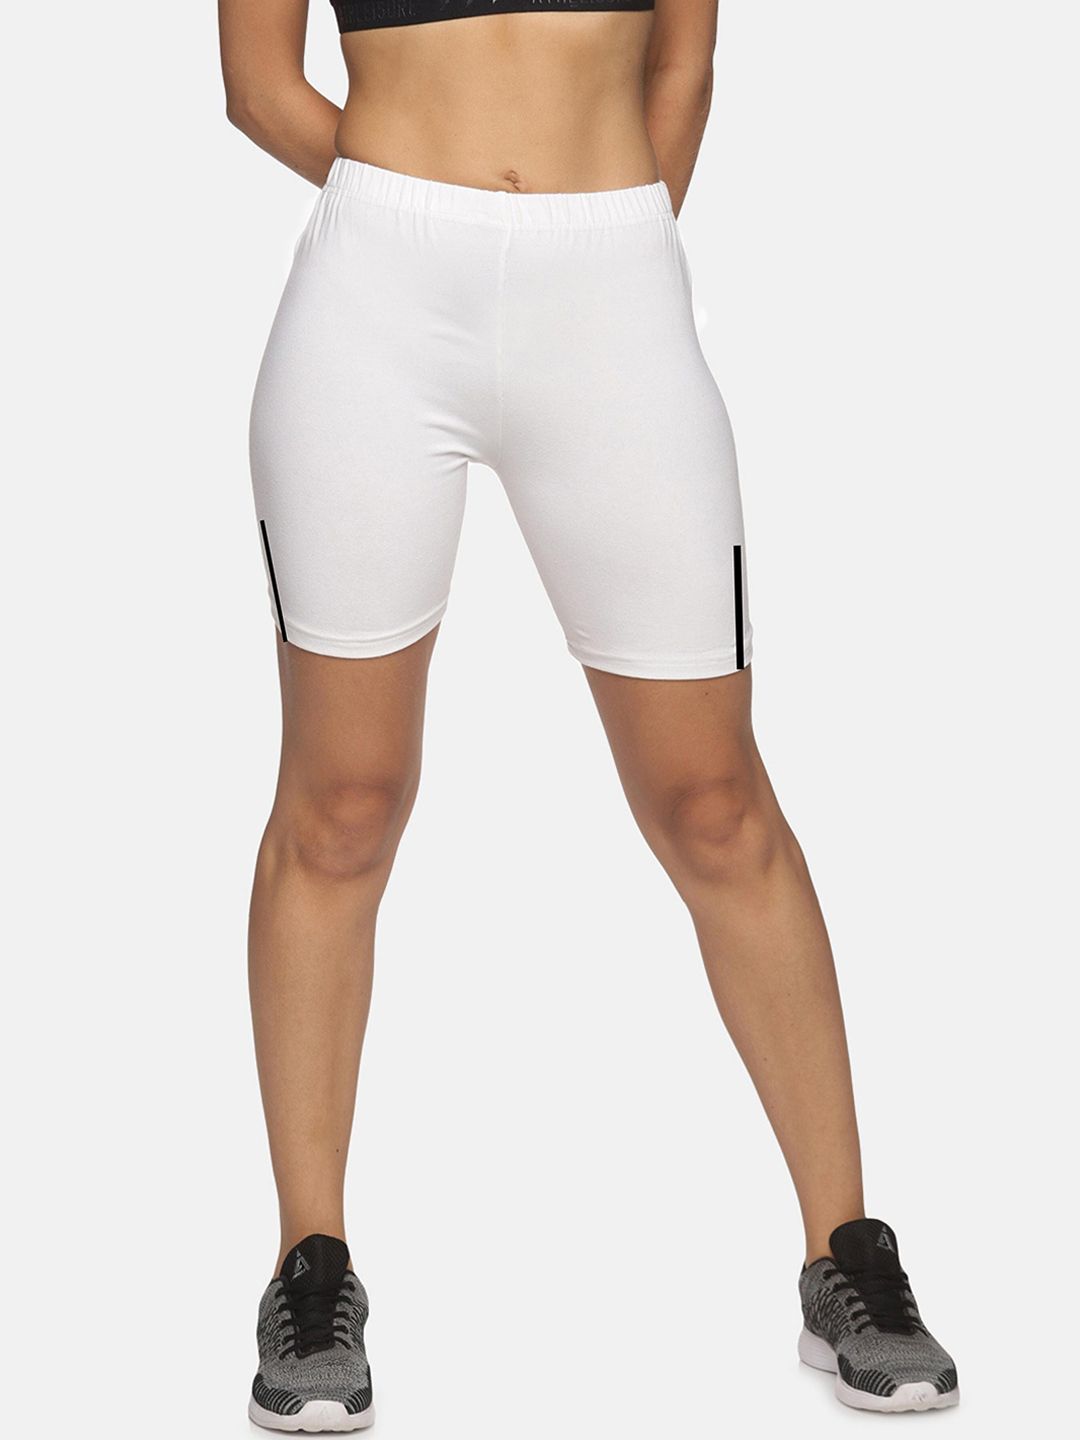 NOT YET by us Women White Slim Fit Cycling Sports Shorts Price in India